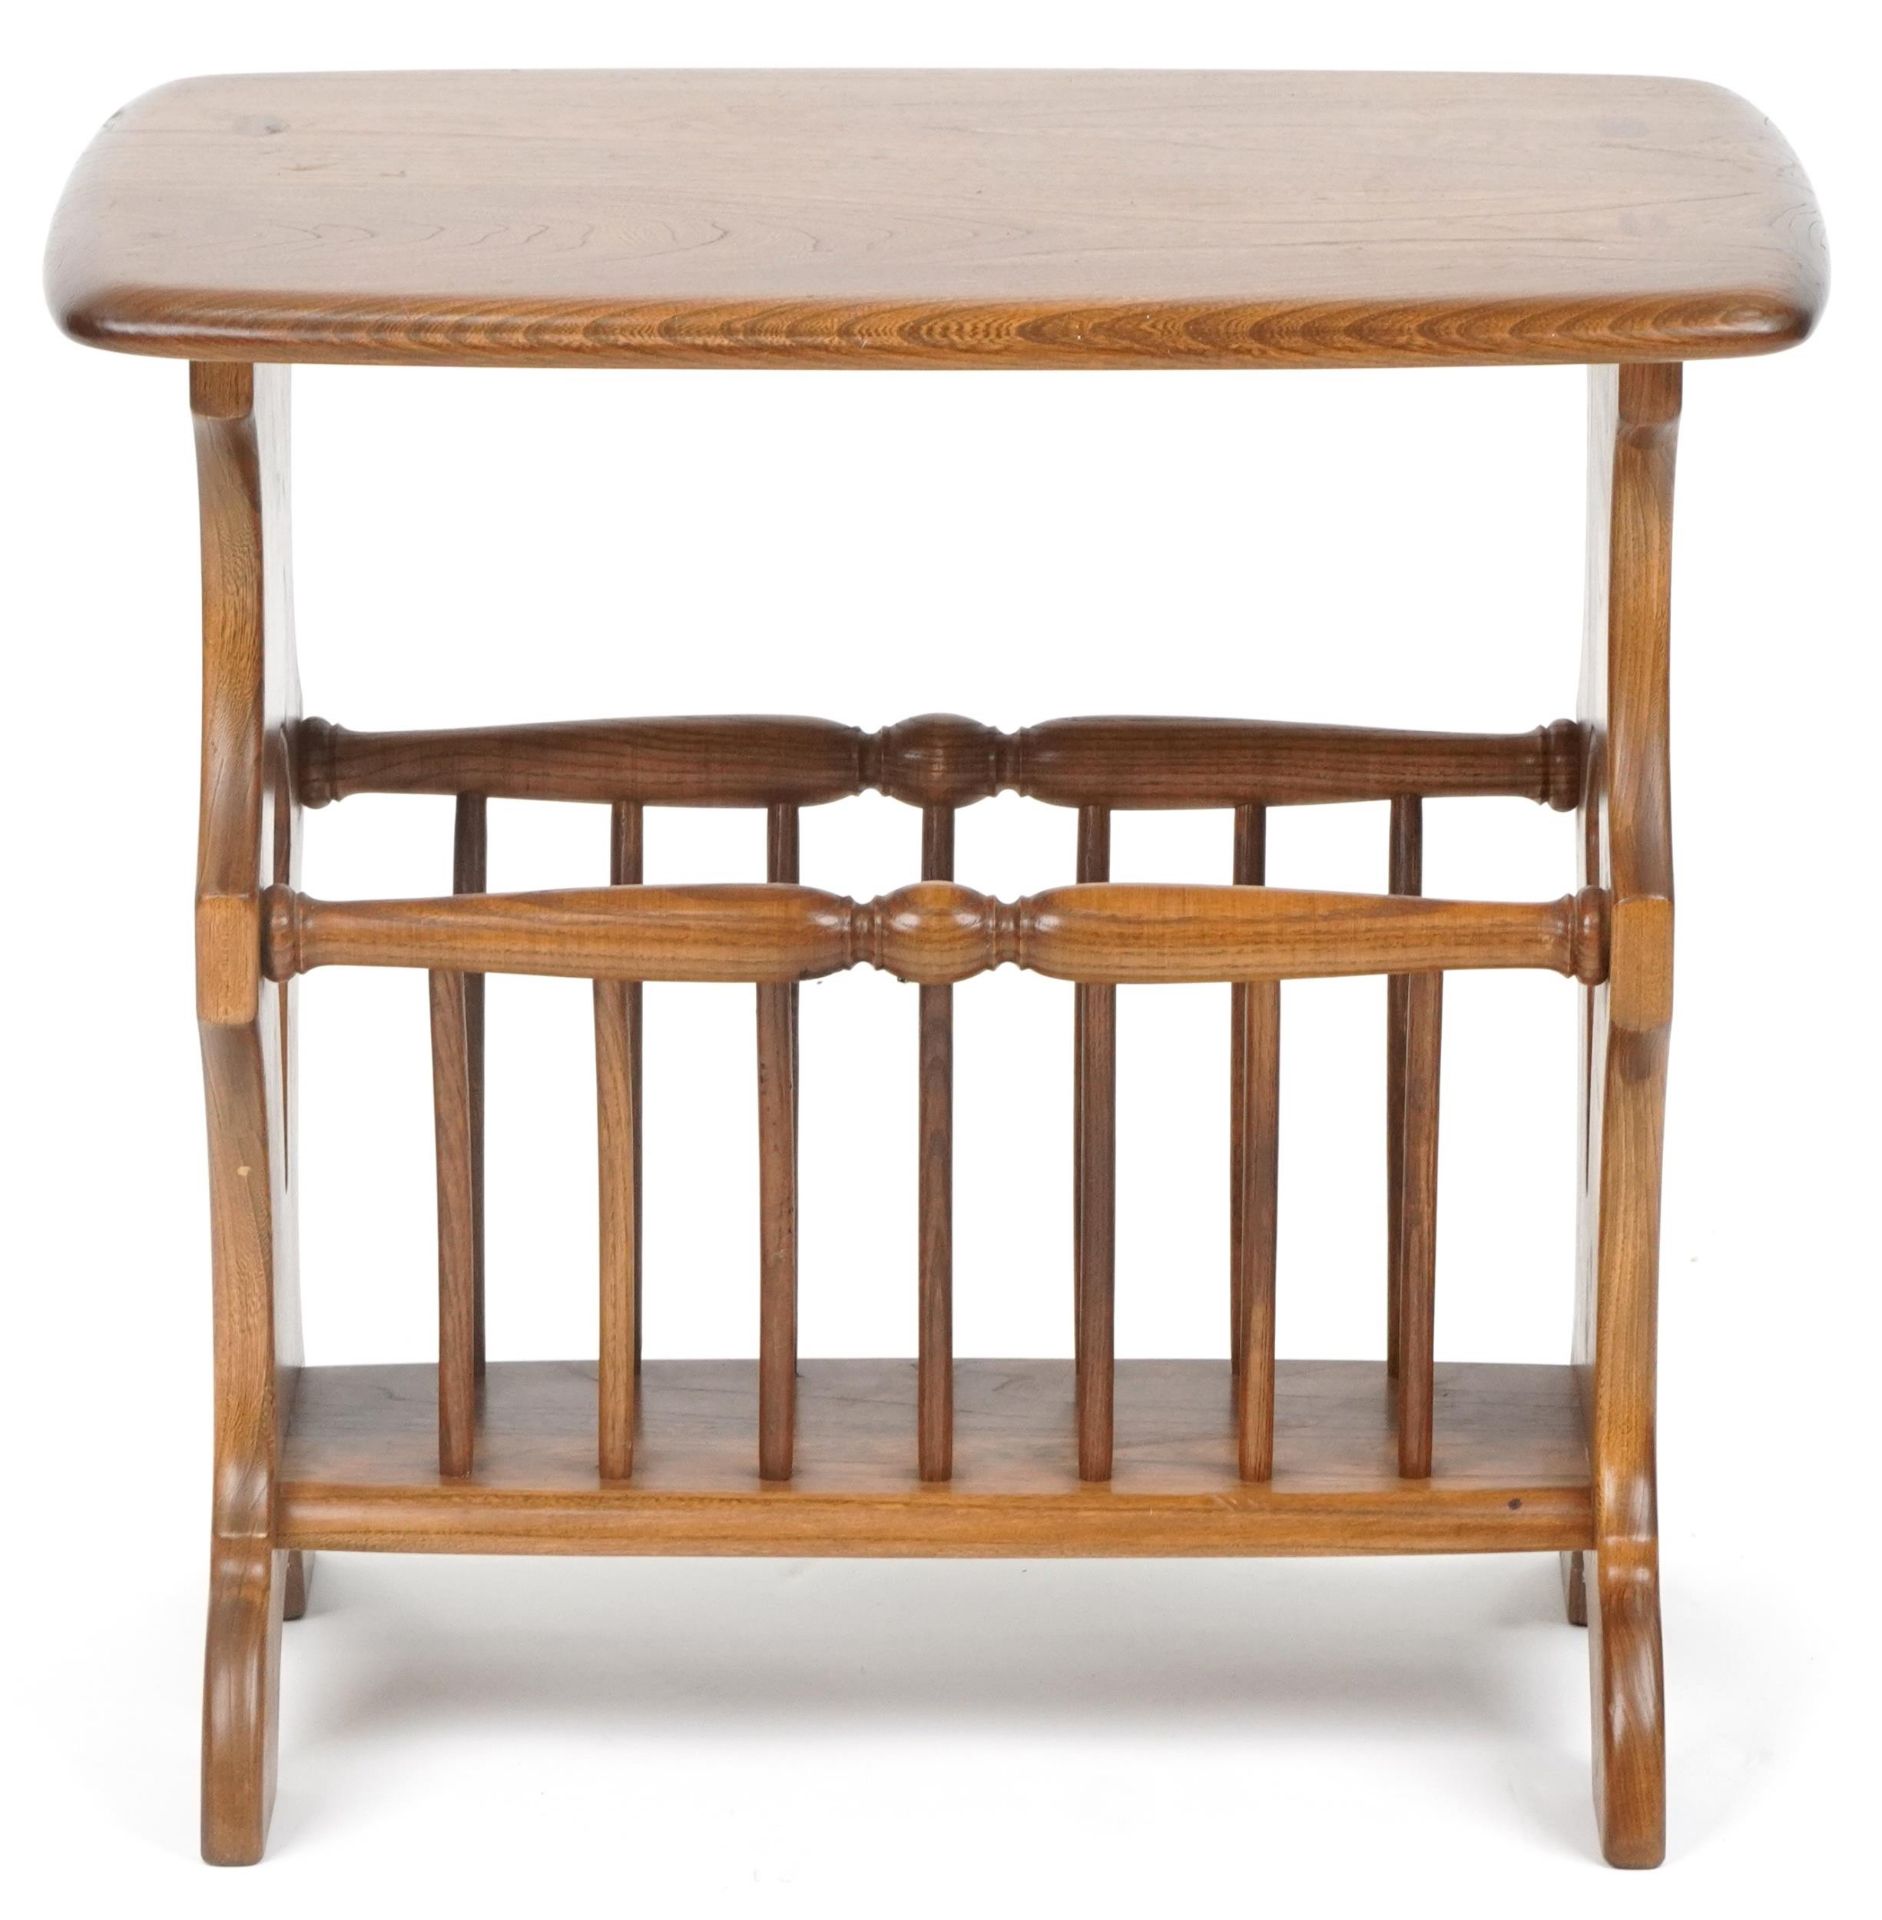 Ercol elm occasional table with magazine rack, 50cm H x 54cm W x 36cm D - Image 2 of 5